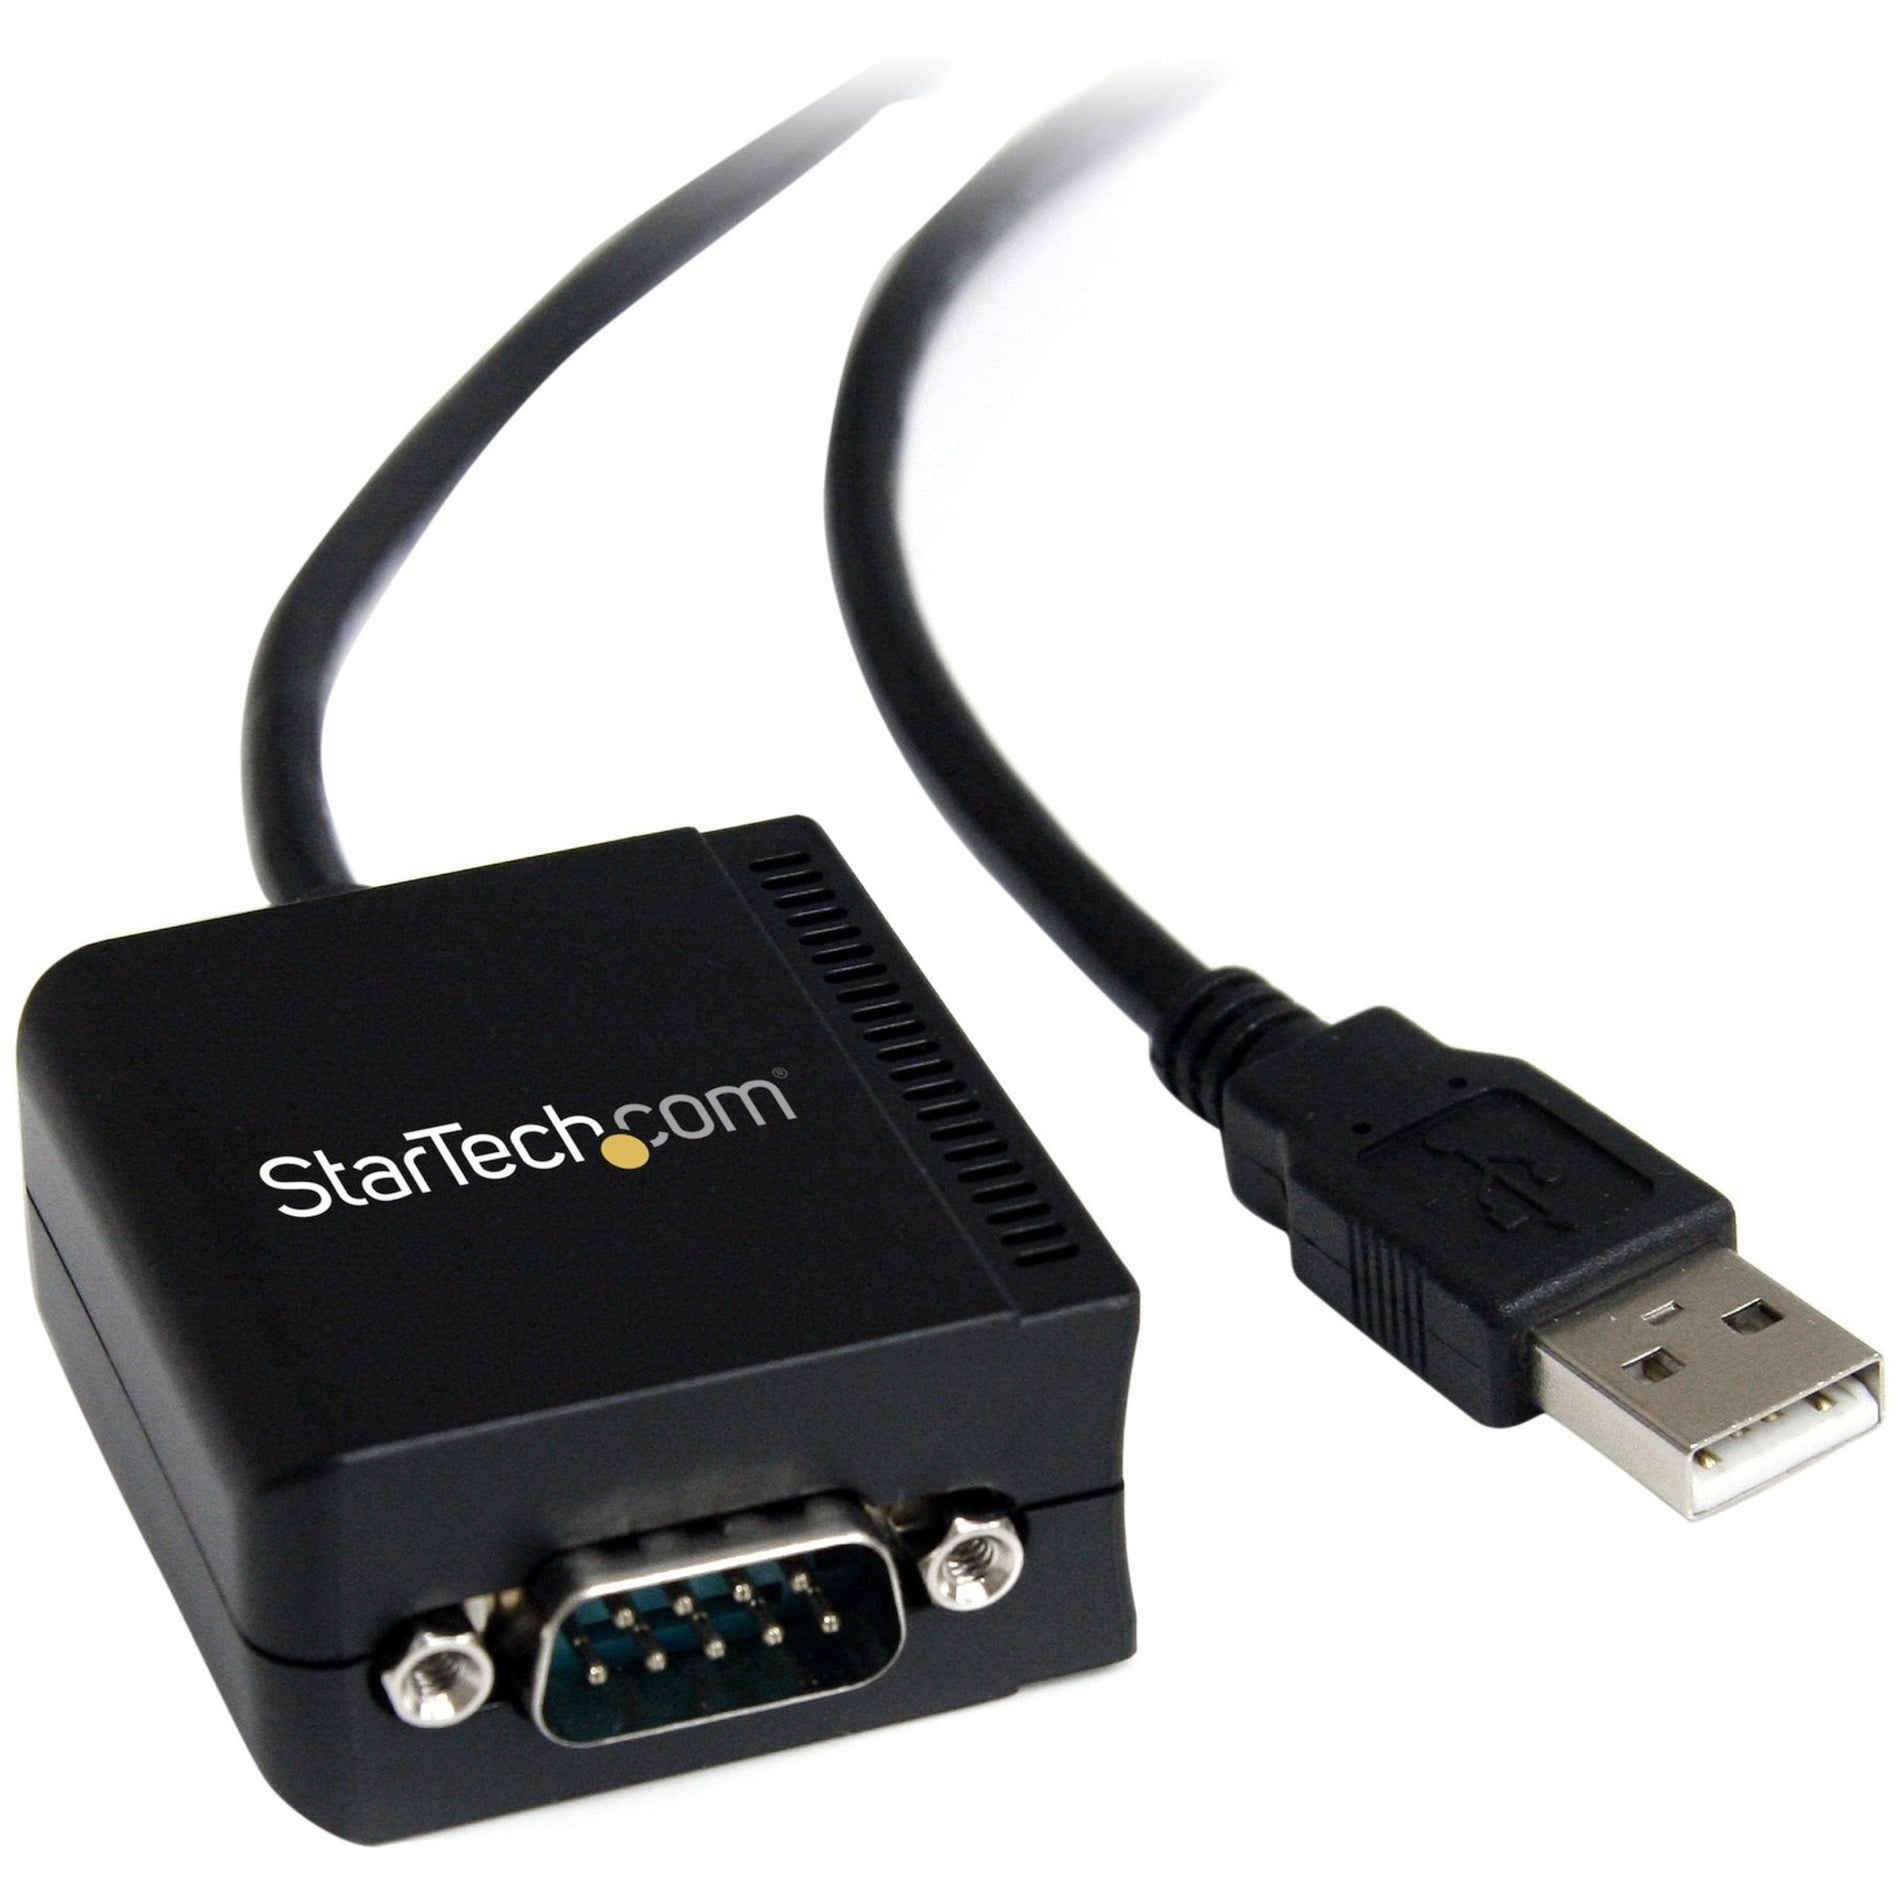 StarTech.com ICUSB2321FIS 1 Port FTDI USB to Serial RS232 Adapter Cable with Isolation, Surge Protection, 8.20 ft Cable Length, Black